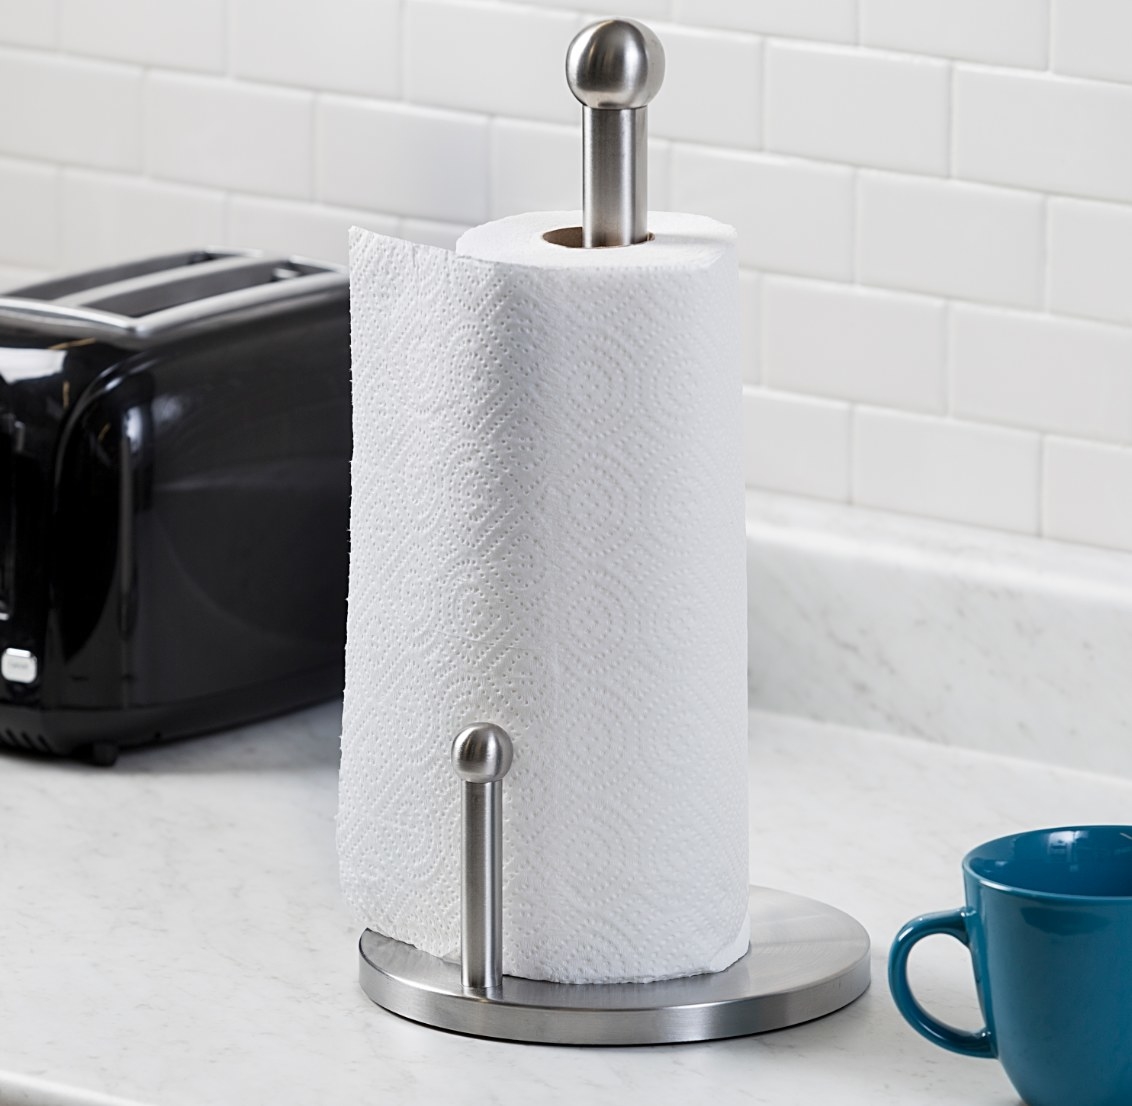 The stainless steel paper towel holder